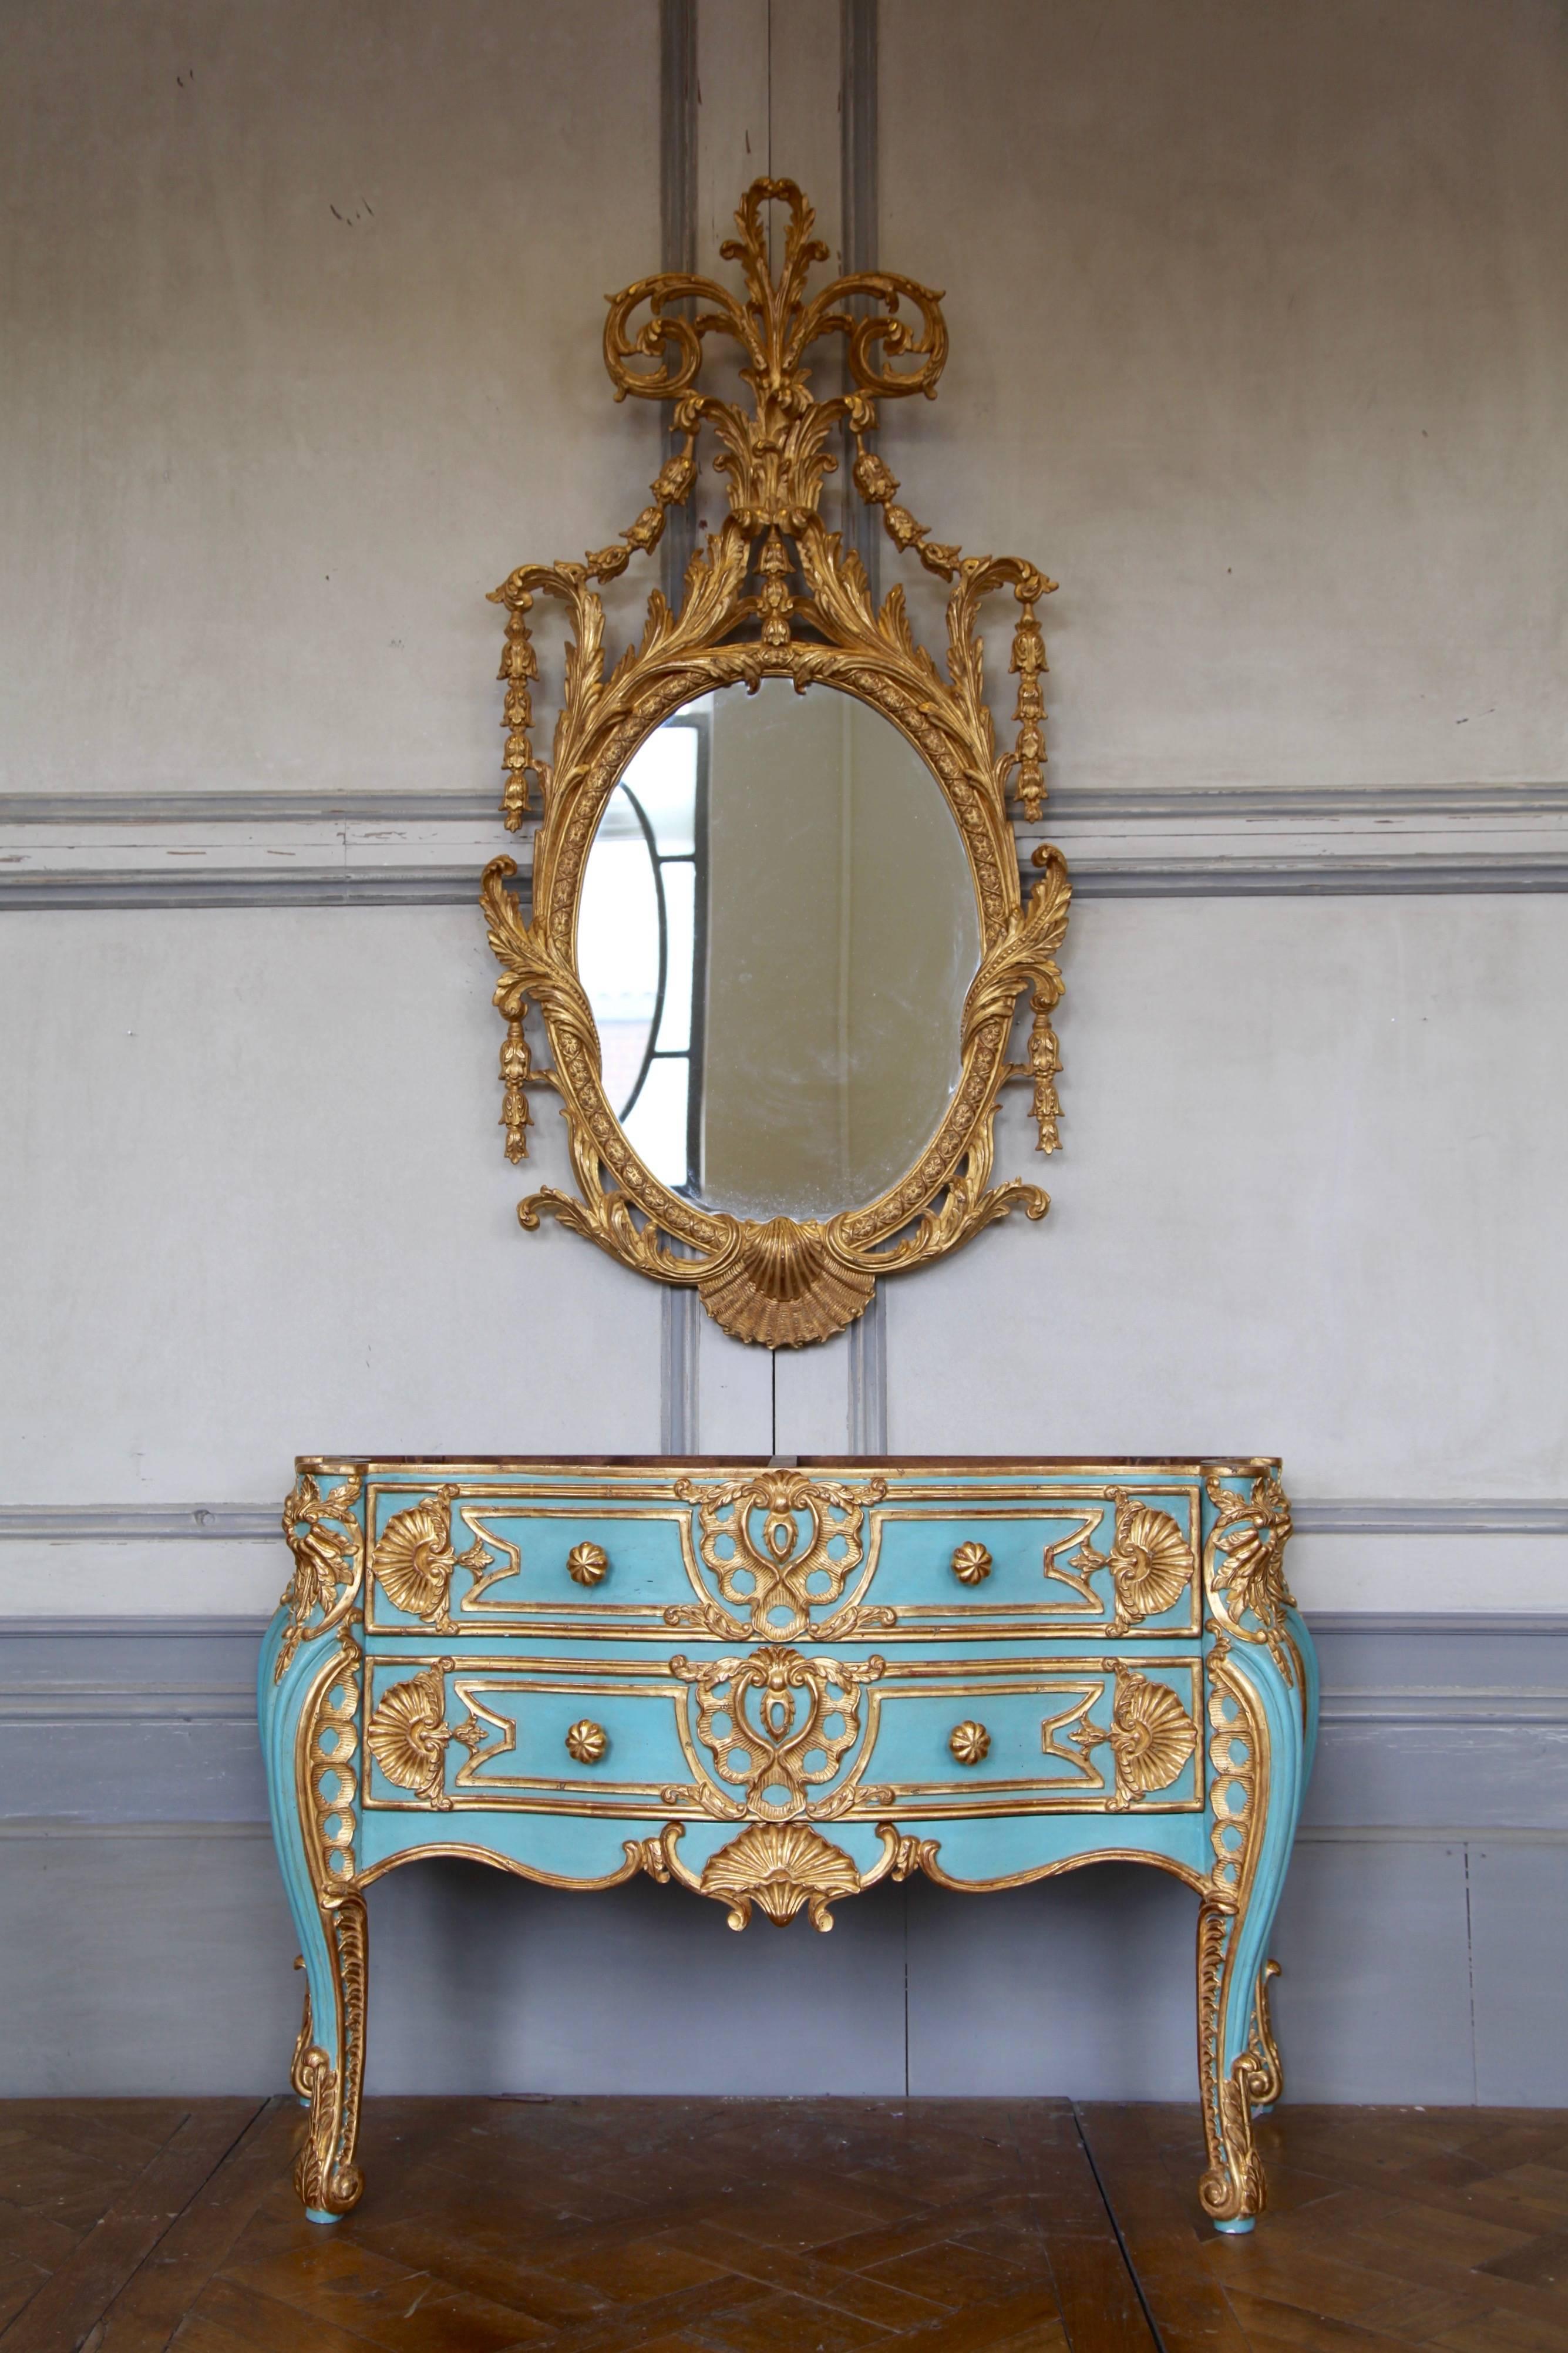 Hand-Carved Italian Baroque Style Giltwood Commode Reproduced by La Maison, London